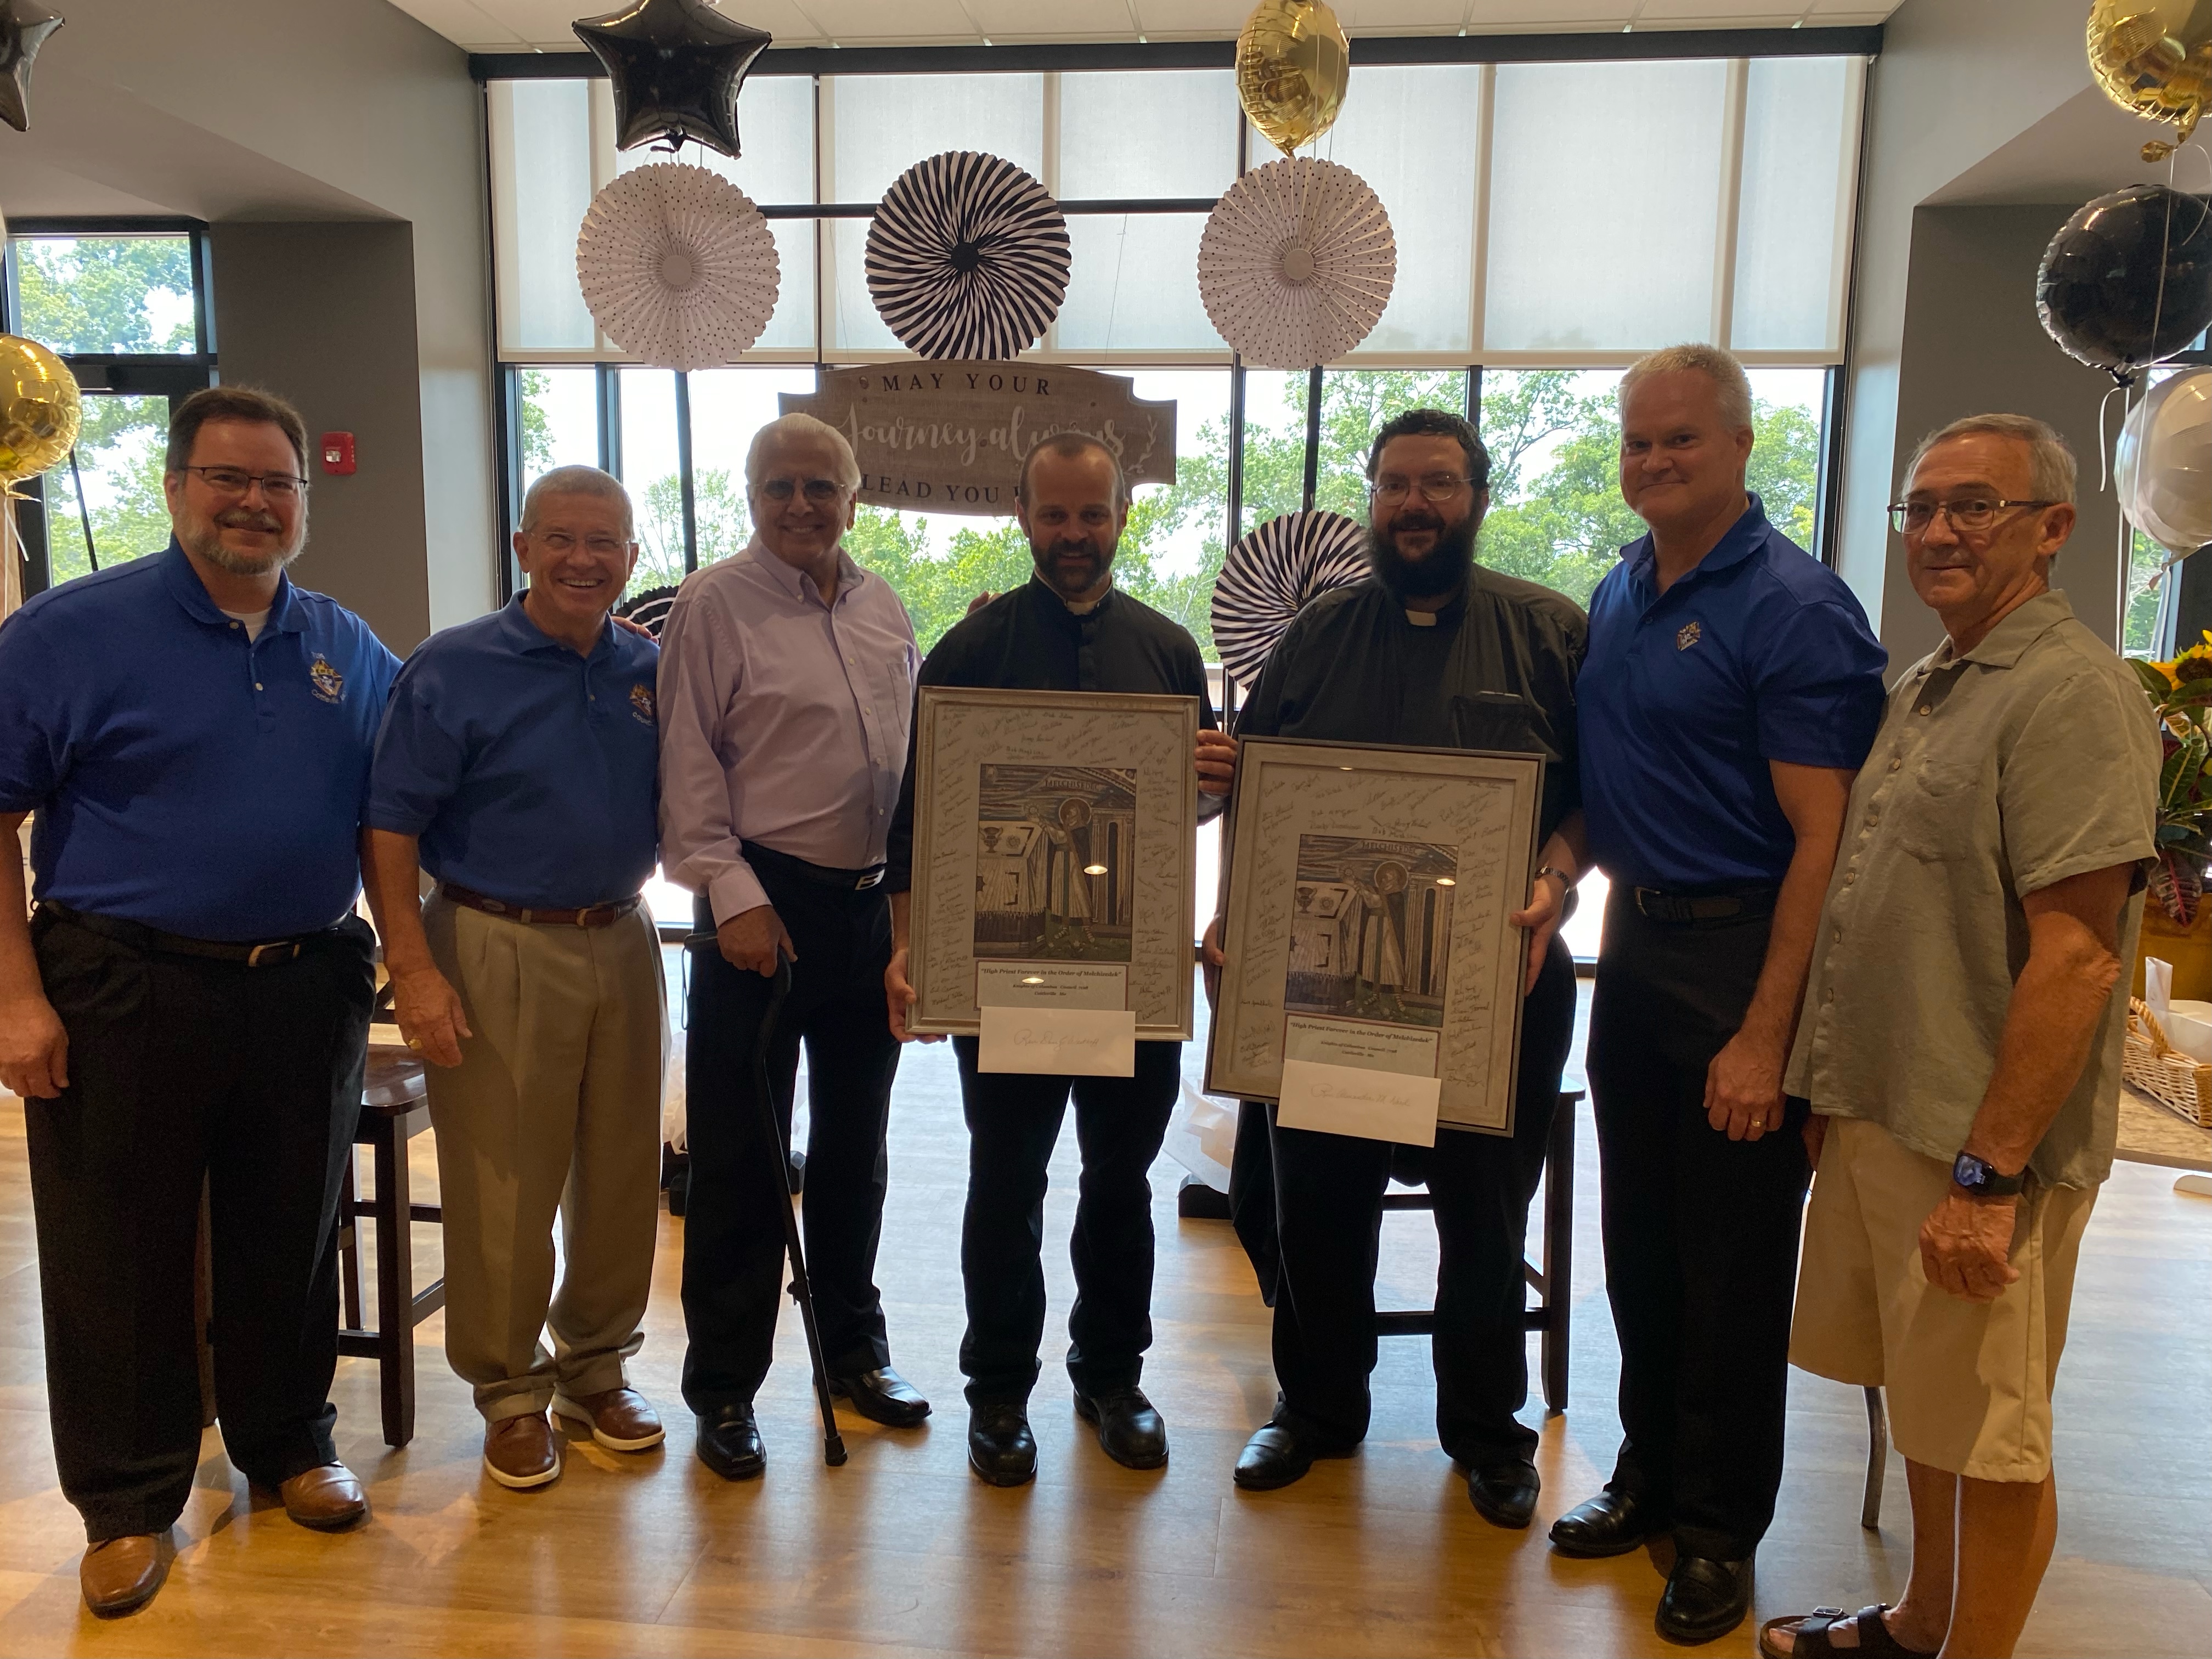 Knights from Fr William Pezold Council 7198 presenting signed pictures of Melchizedek to Fr. Nord and Fr. Westhoff's at their Farewell Reception